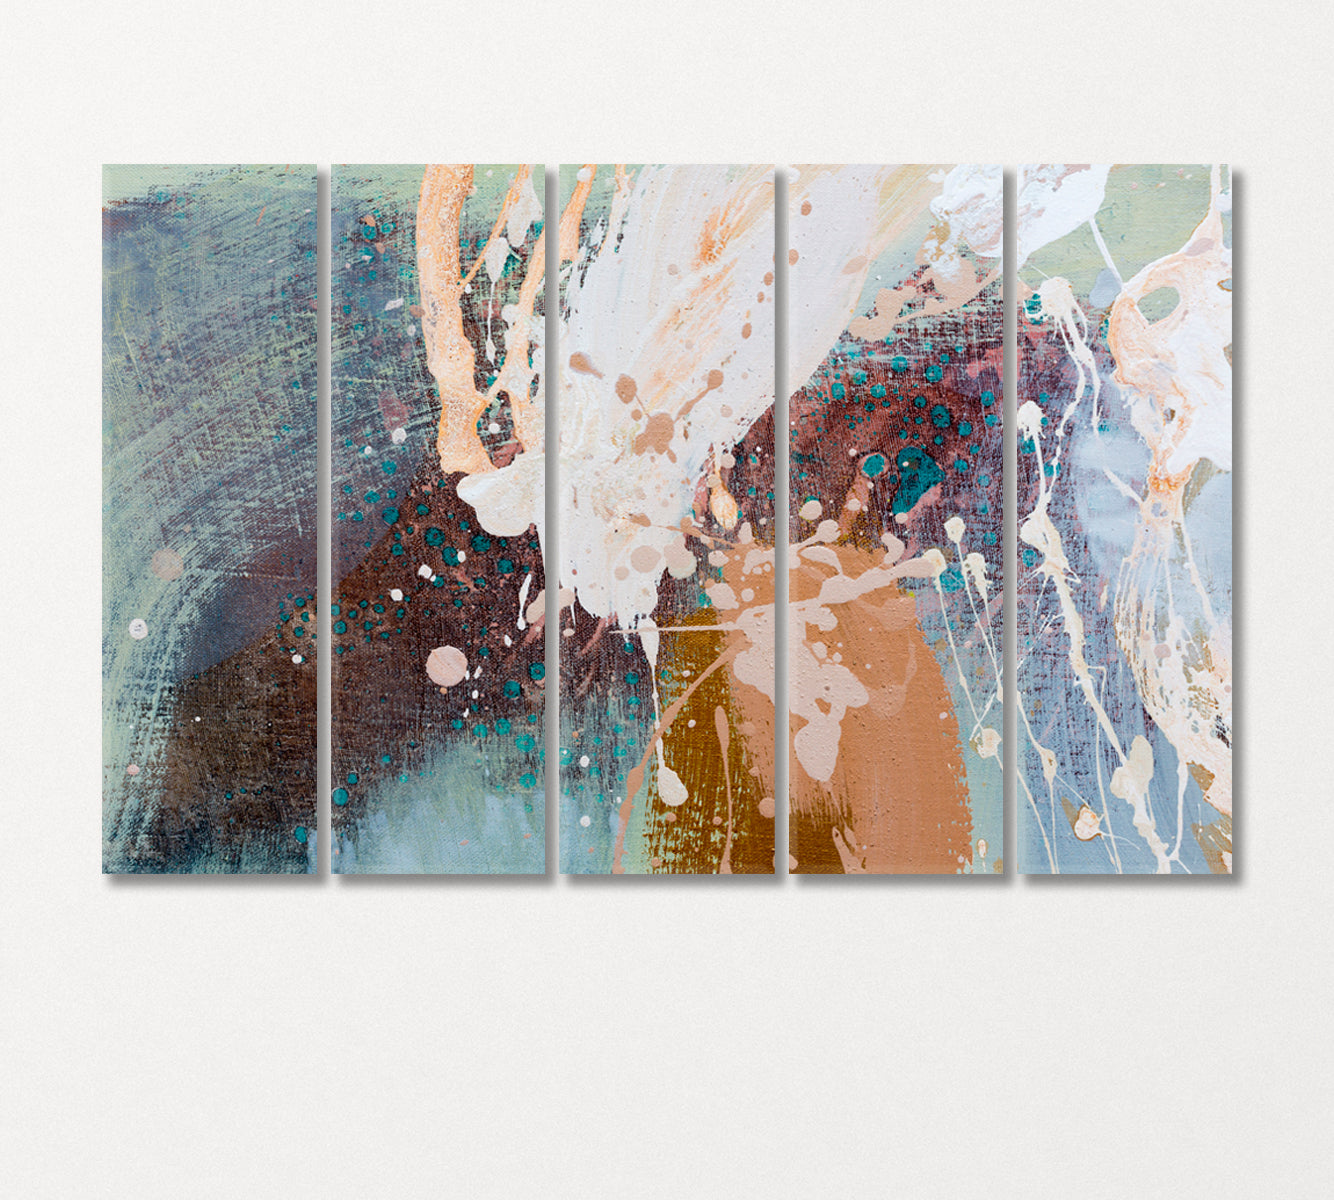 Abstract Brush Strokes in Pastel Colors Canvas Print-Artwork-CetArt-5 Panels-36x24 inches-CetArt